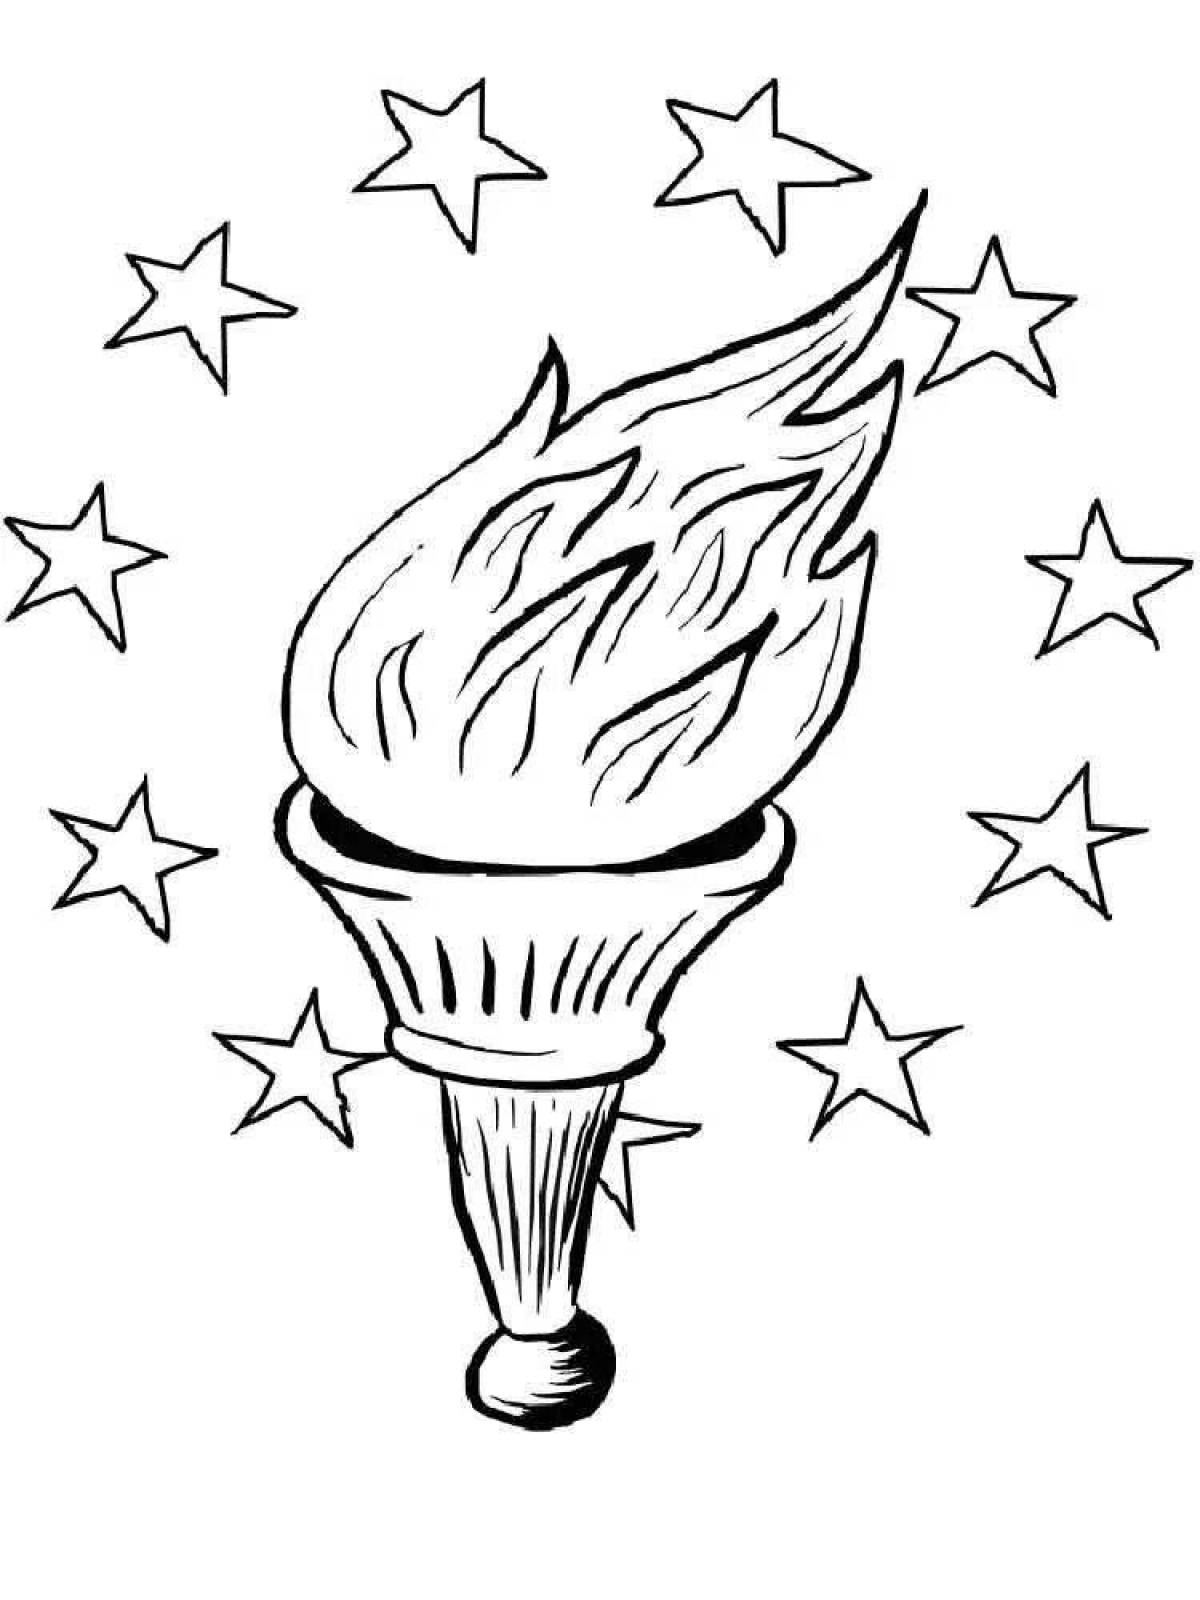 Olympic fire flaming coloring page